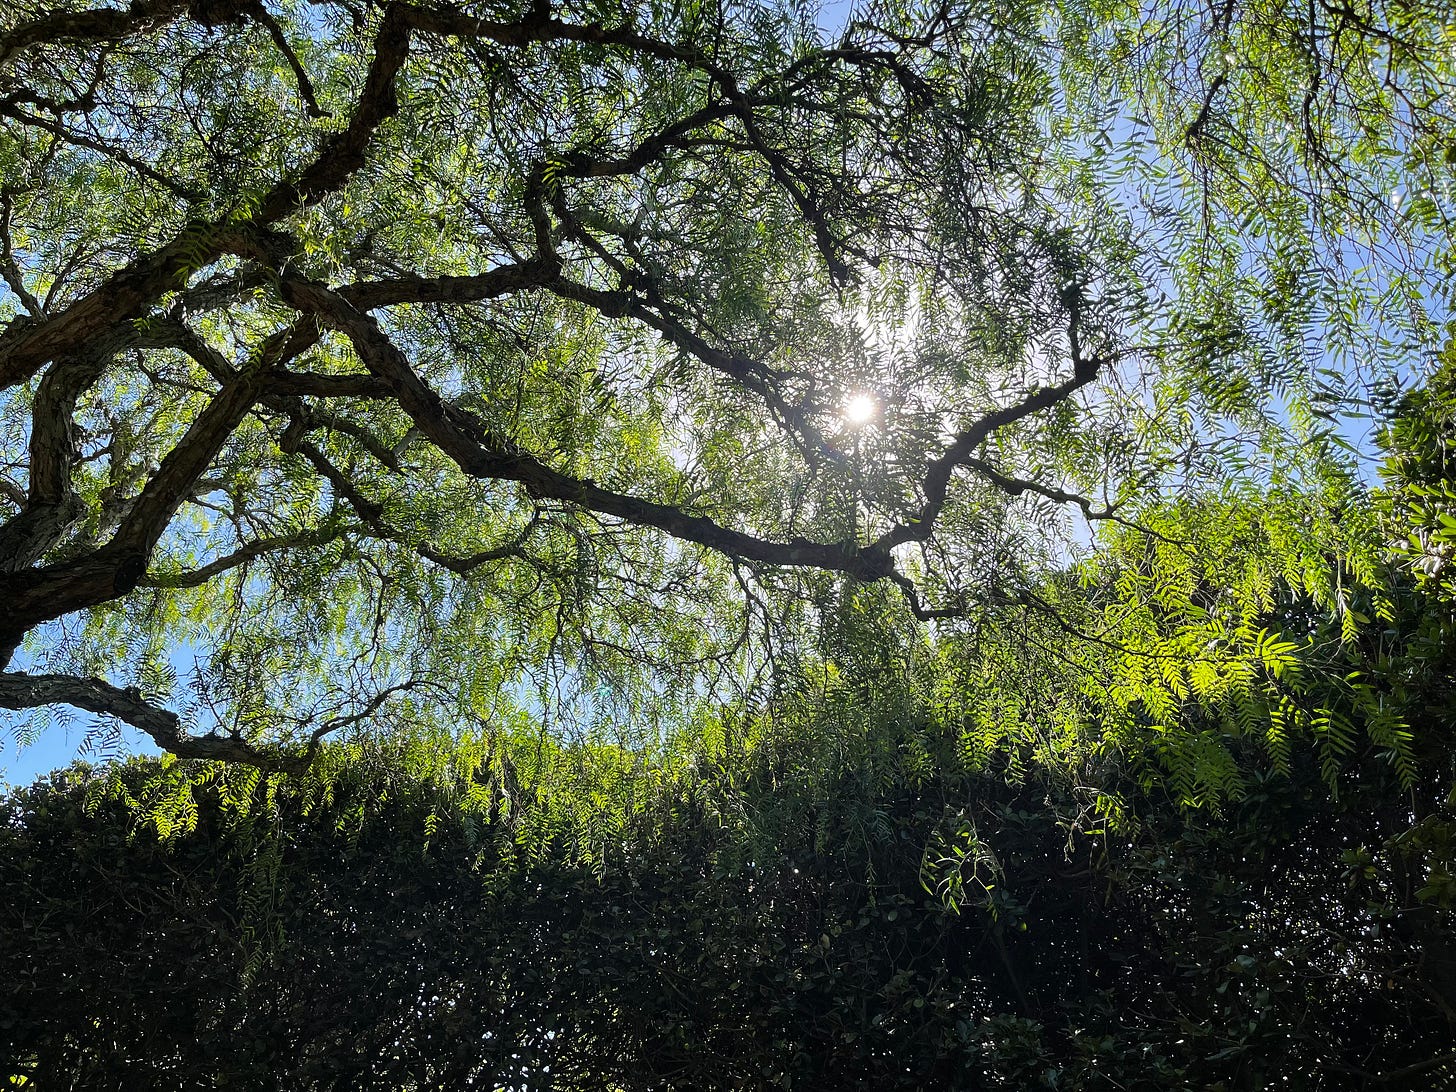 Sunshine flickers through the leaves and craggy branches of the pepper tree that centers the St. Francis altar at the gardens. Blue sky and light add the counterpoint to the rich foliage motif.